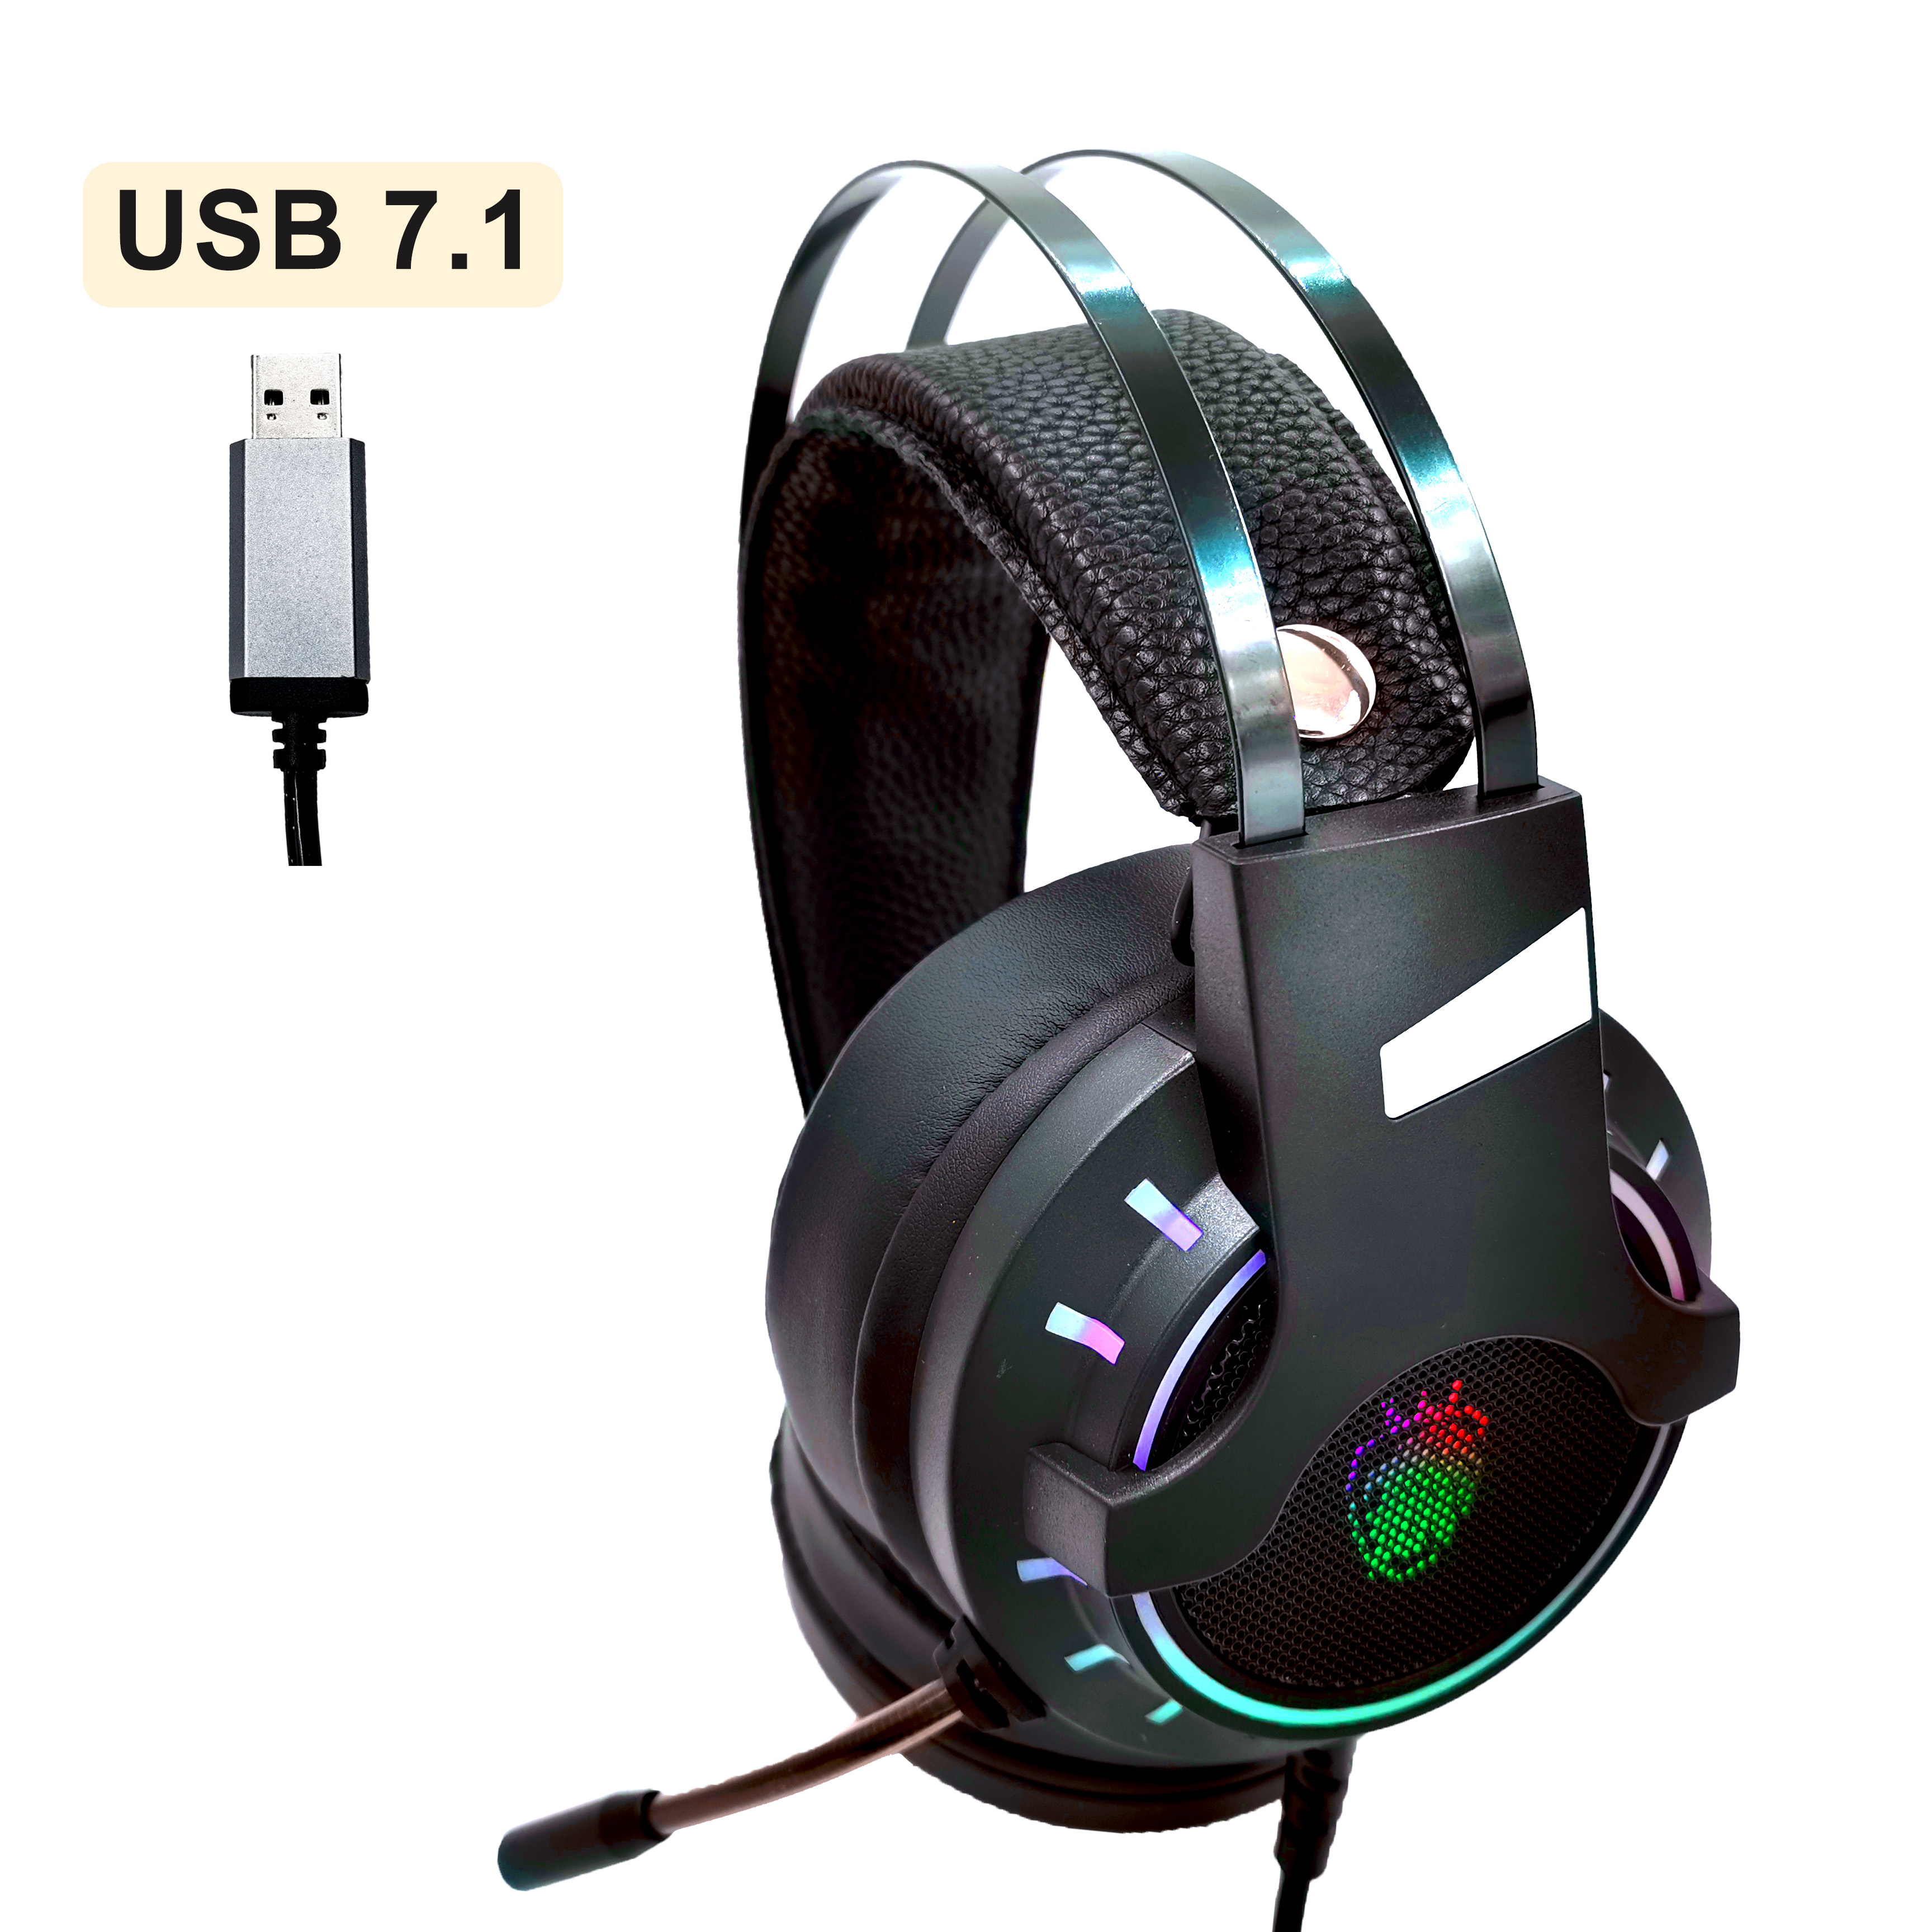 USB 7.1 & Wired Music & Gaming Headphones Headsets with Microphone Stereo Game Earphones Anti-noise Bass RGB Light For PC PS4 - Price history & Review | AliExpress Seller Moresmart Store | Alitools.io